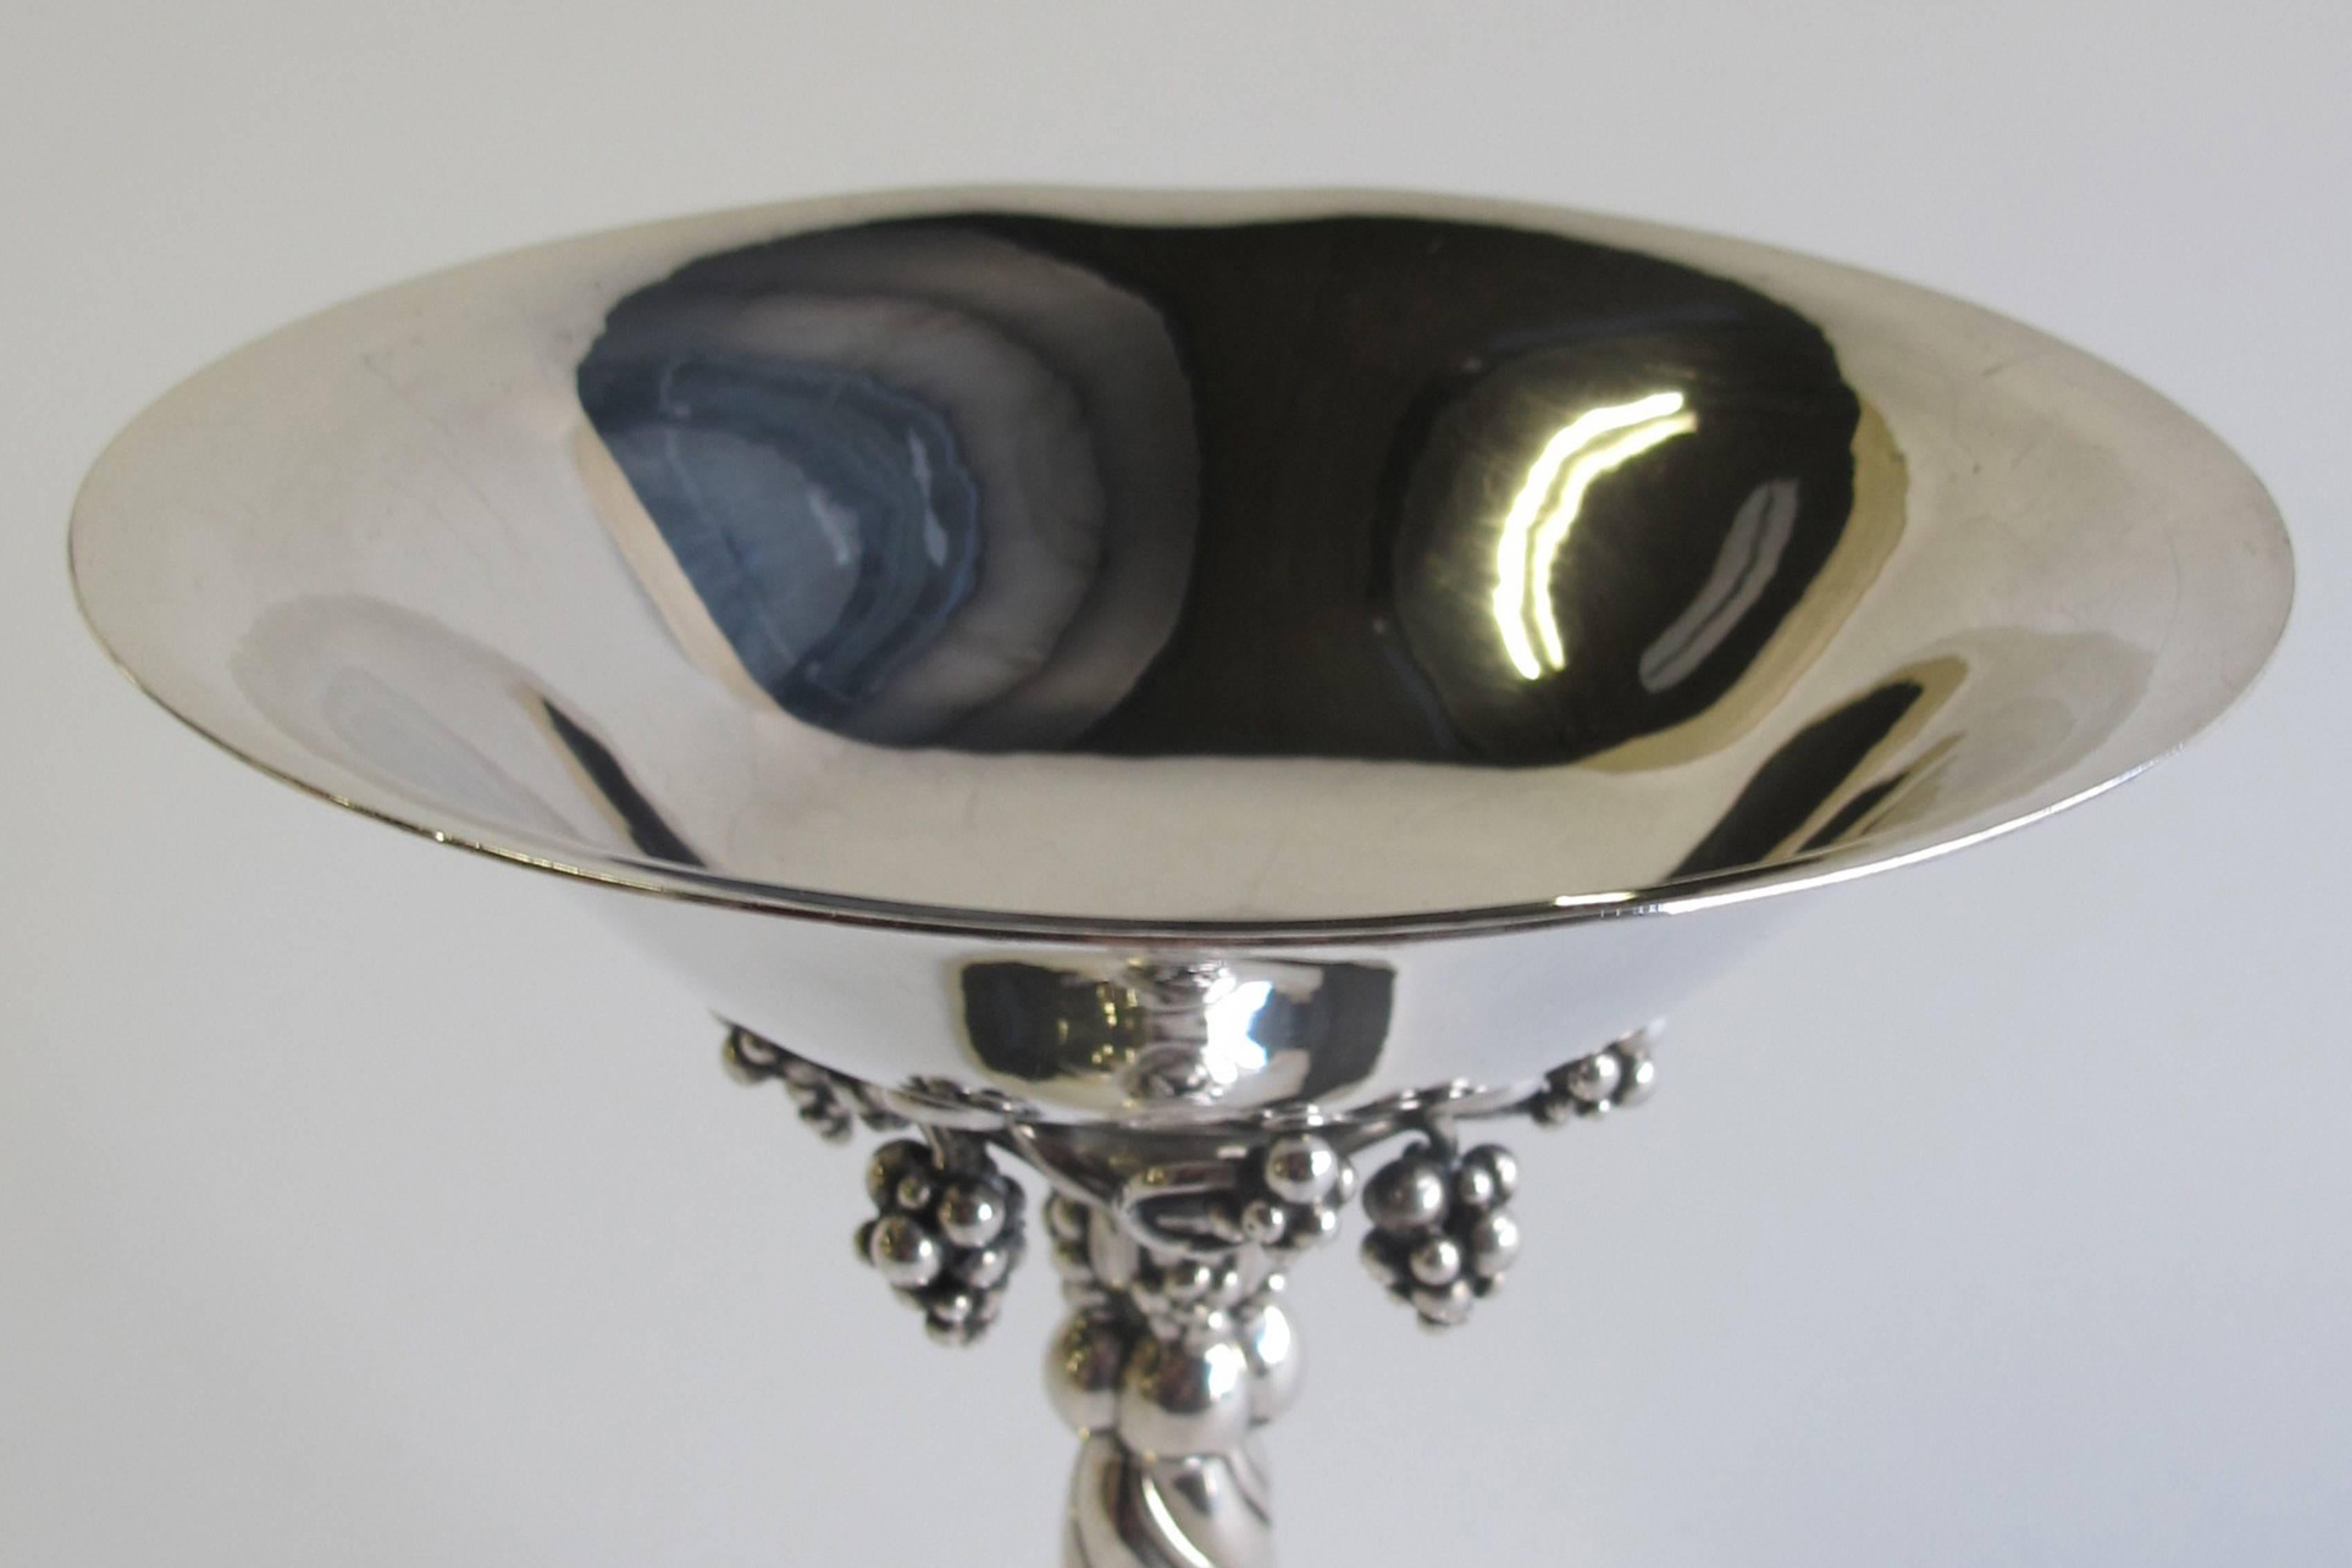 Gorgeous hammered sterling silver tazza with grapes (model no. 263) designed by Georg Jensen in 1918. The compote has a spiral fluted stem and a circular foot.

This particular tazza was once engraved for an anniversary. This inscription reads 'Fra